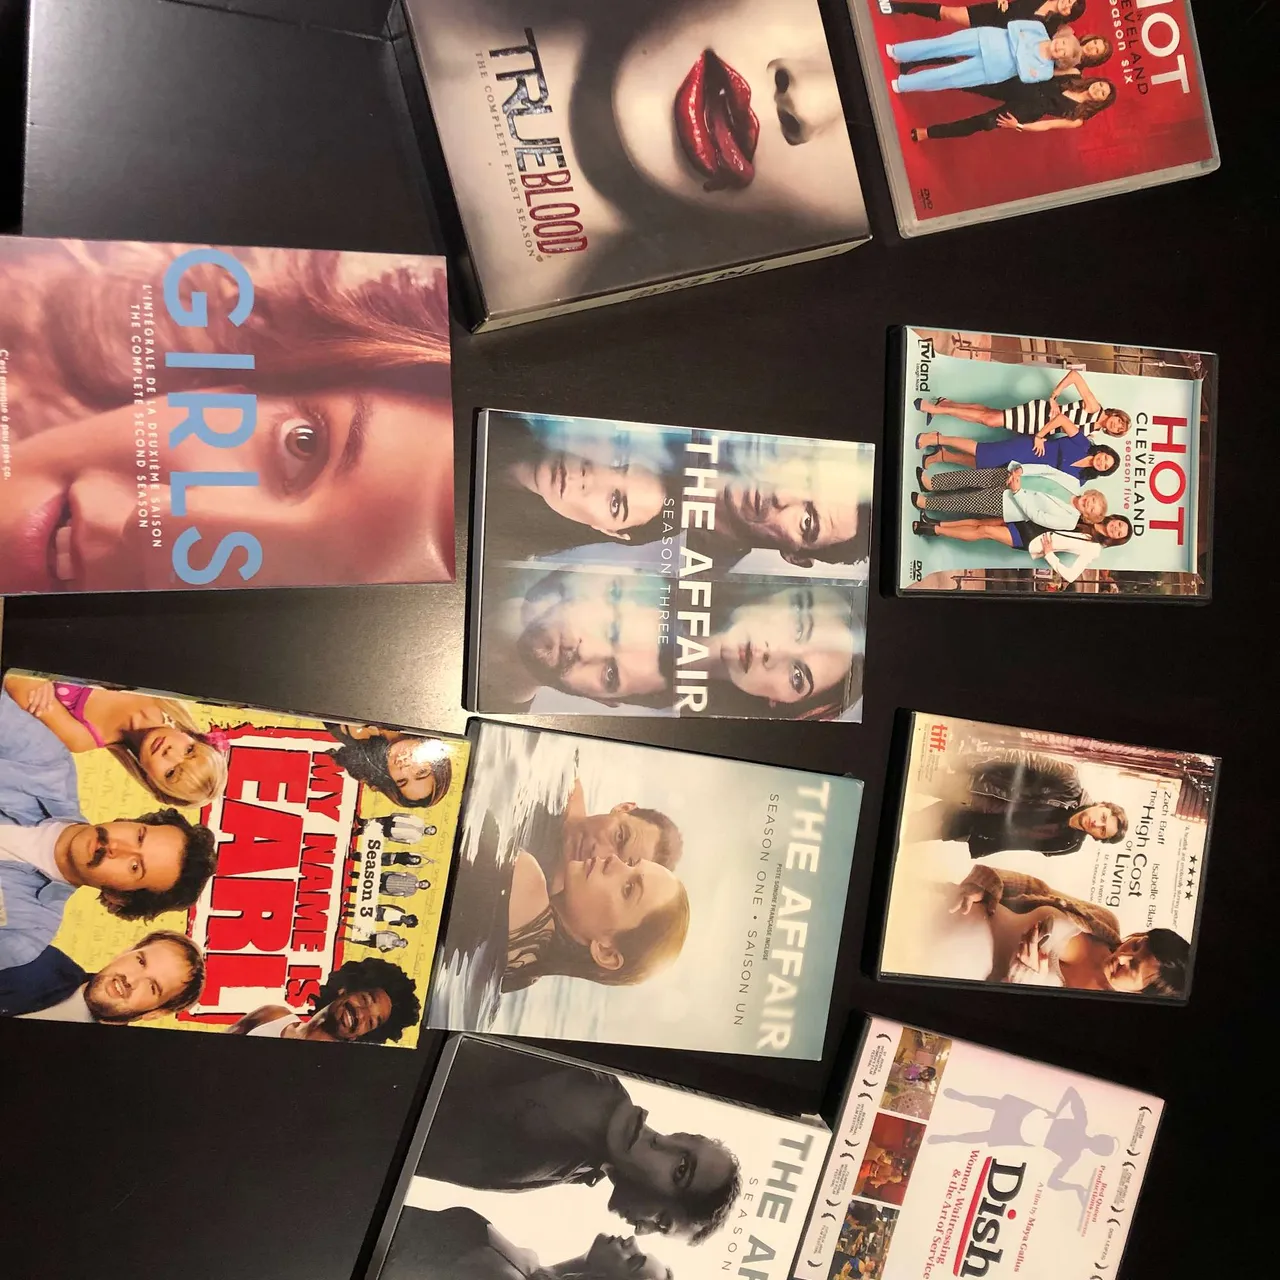 DVDs of full seasons of shows like the Affair, Hot in Cleveland photo 1